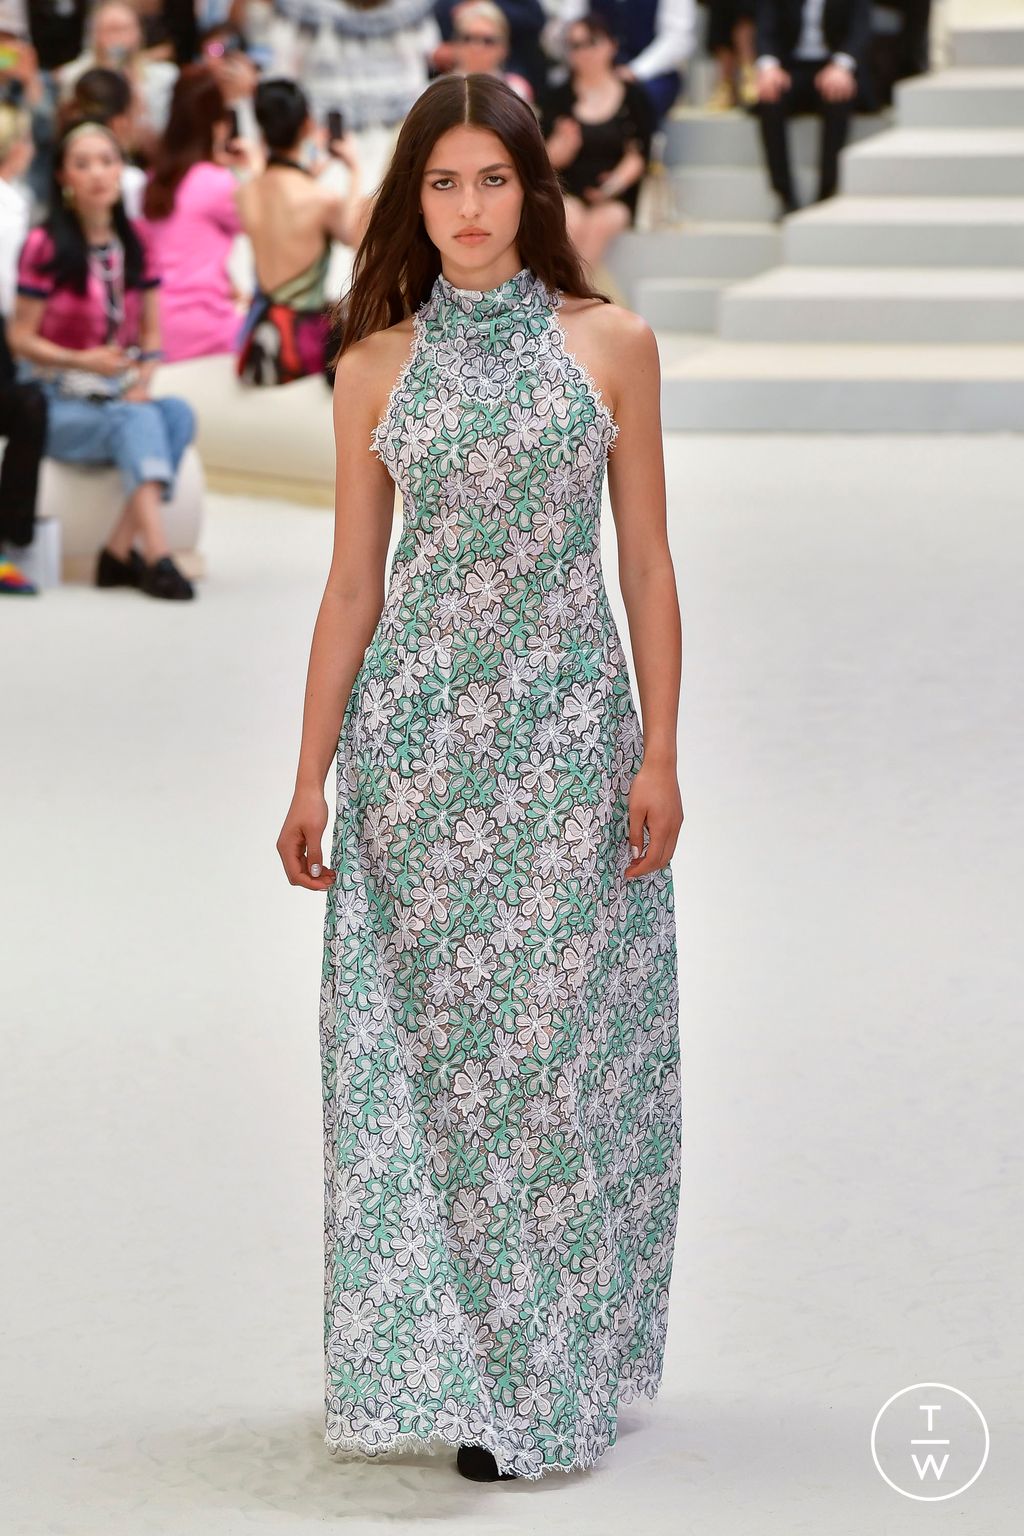 Chanel FW22 couture #30 - Tagwalk: The Fashion Search Engine